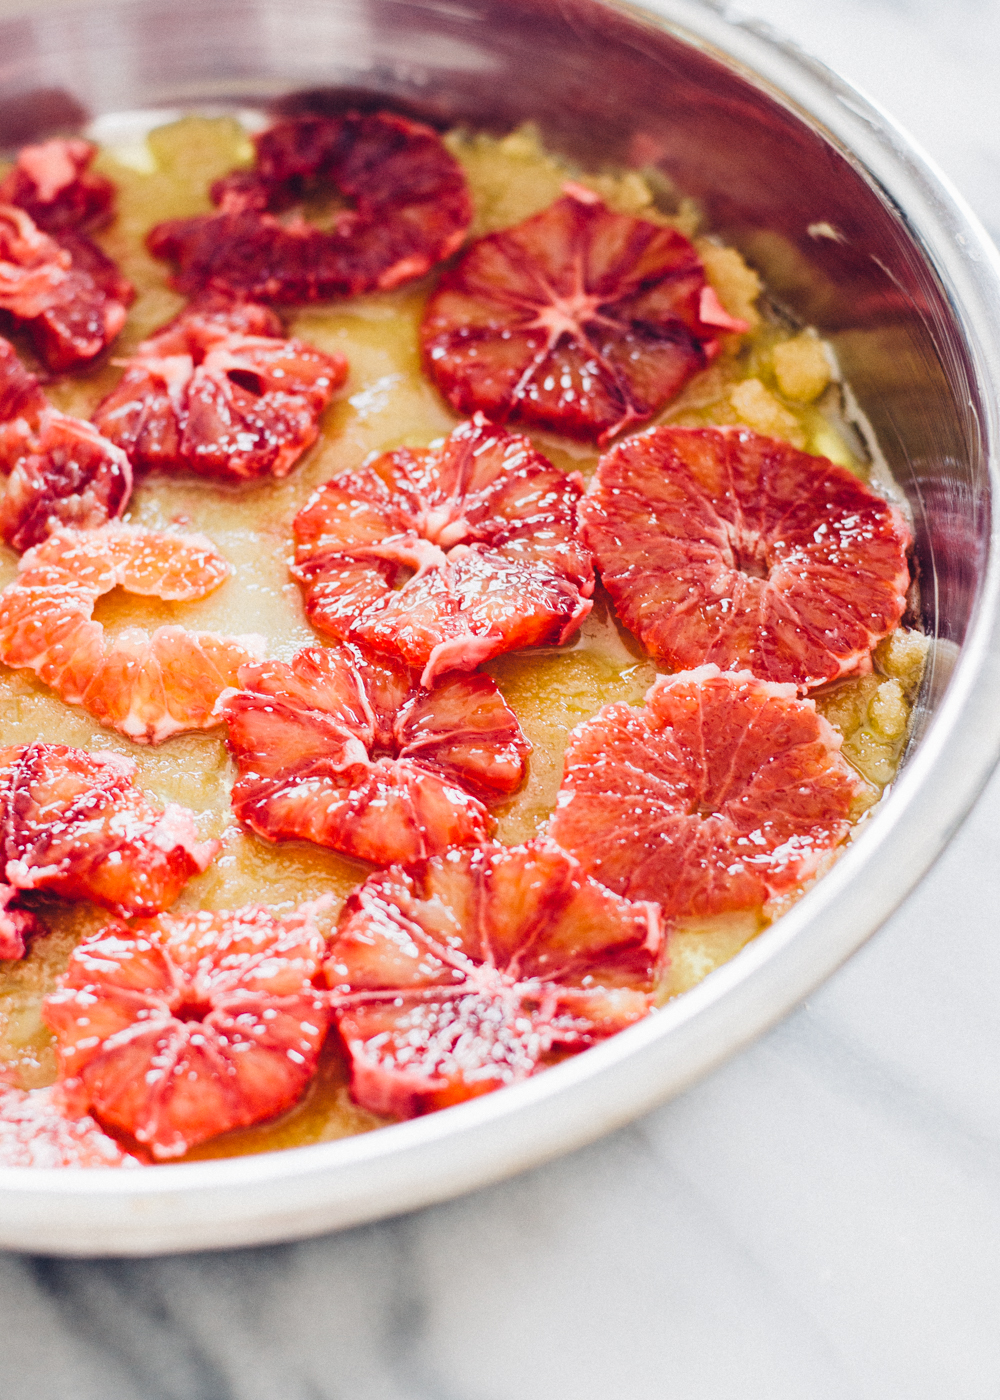 Blood Orange Olive Oil Cake - a ridiculously easy dessert that is super flavorful.